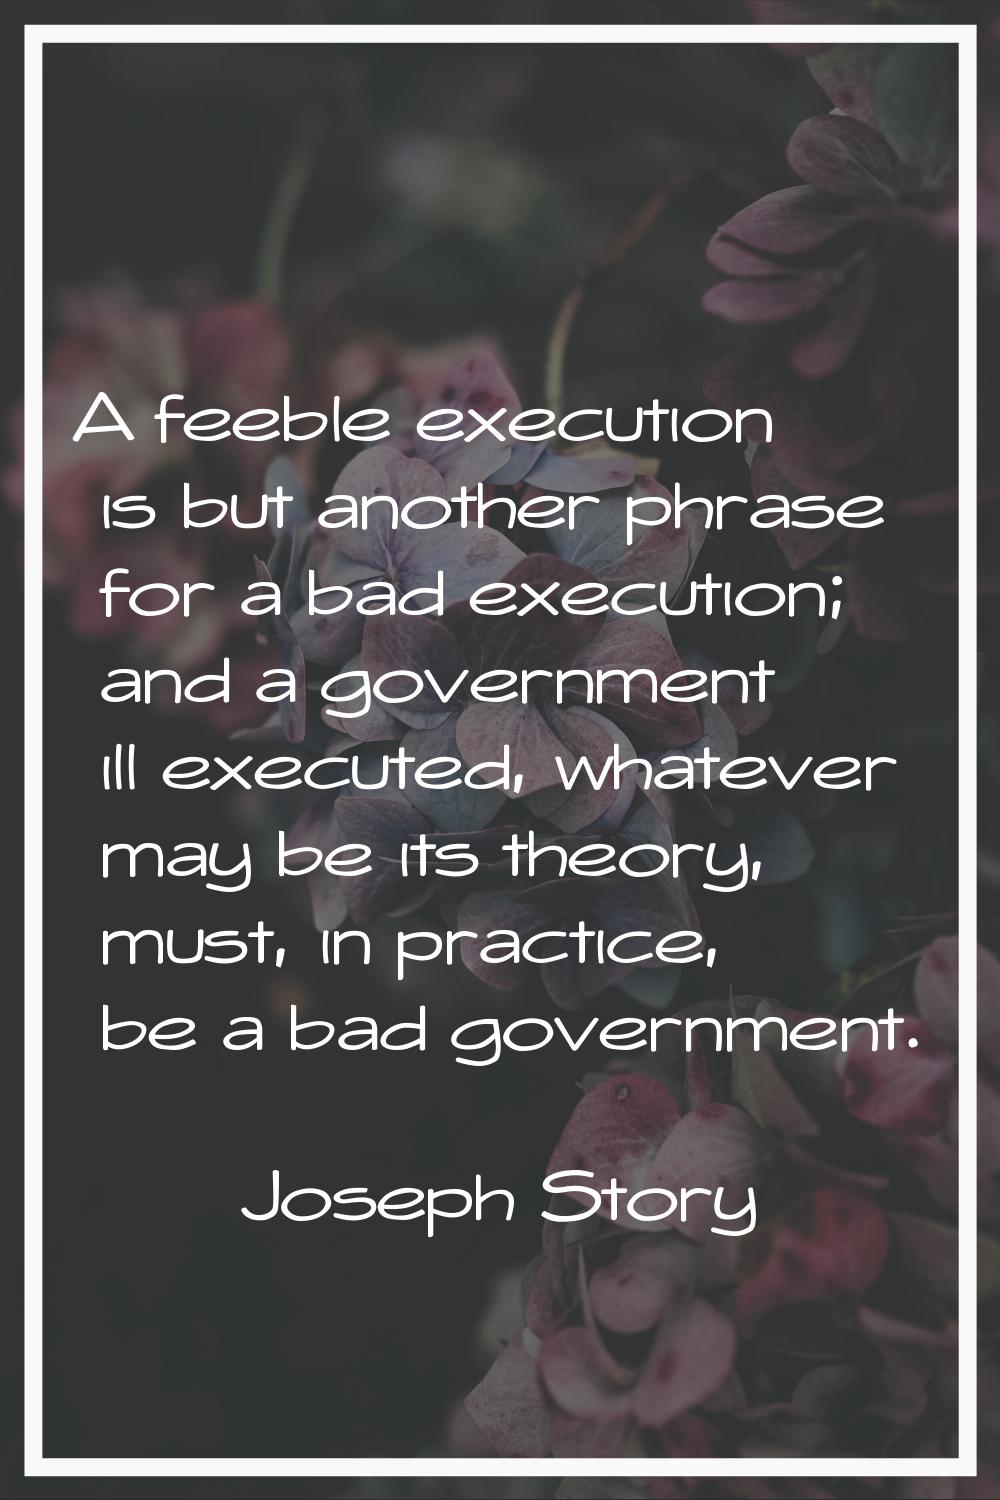 A feeble execution is but another phrase for a bad execution; and a government ill executed, whatev